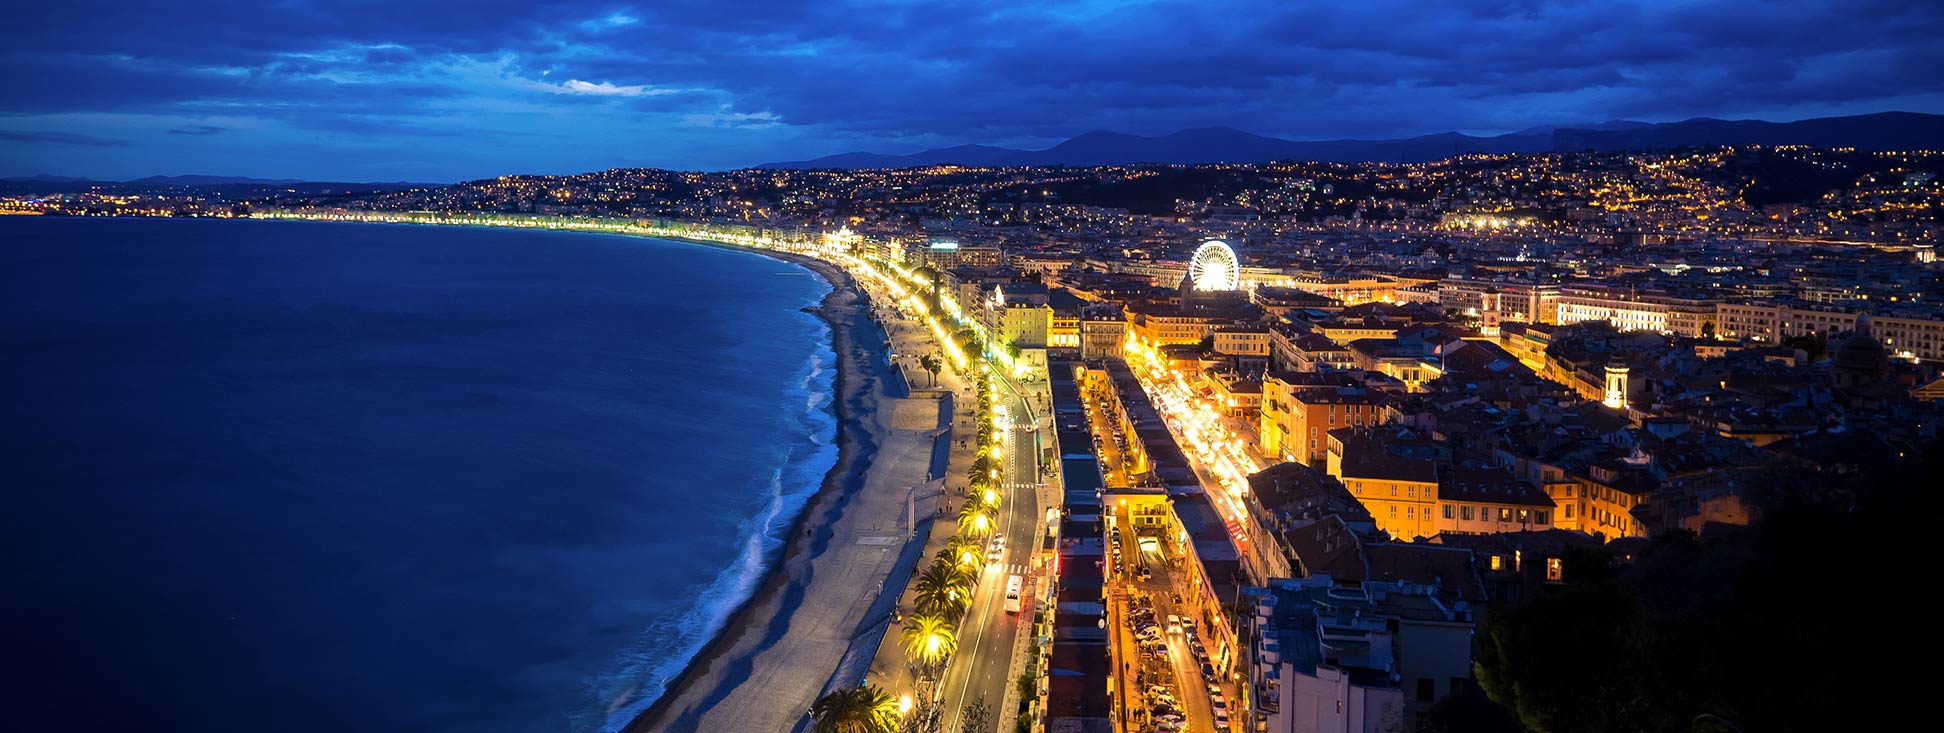 Google Map of Nice, France - Nations Online Project